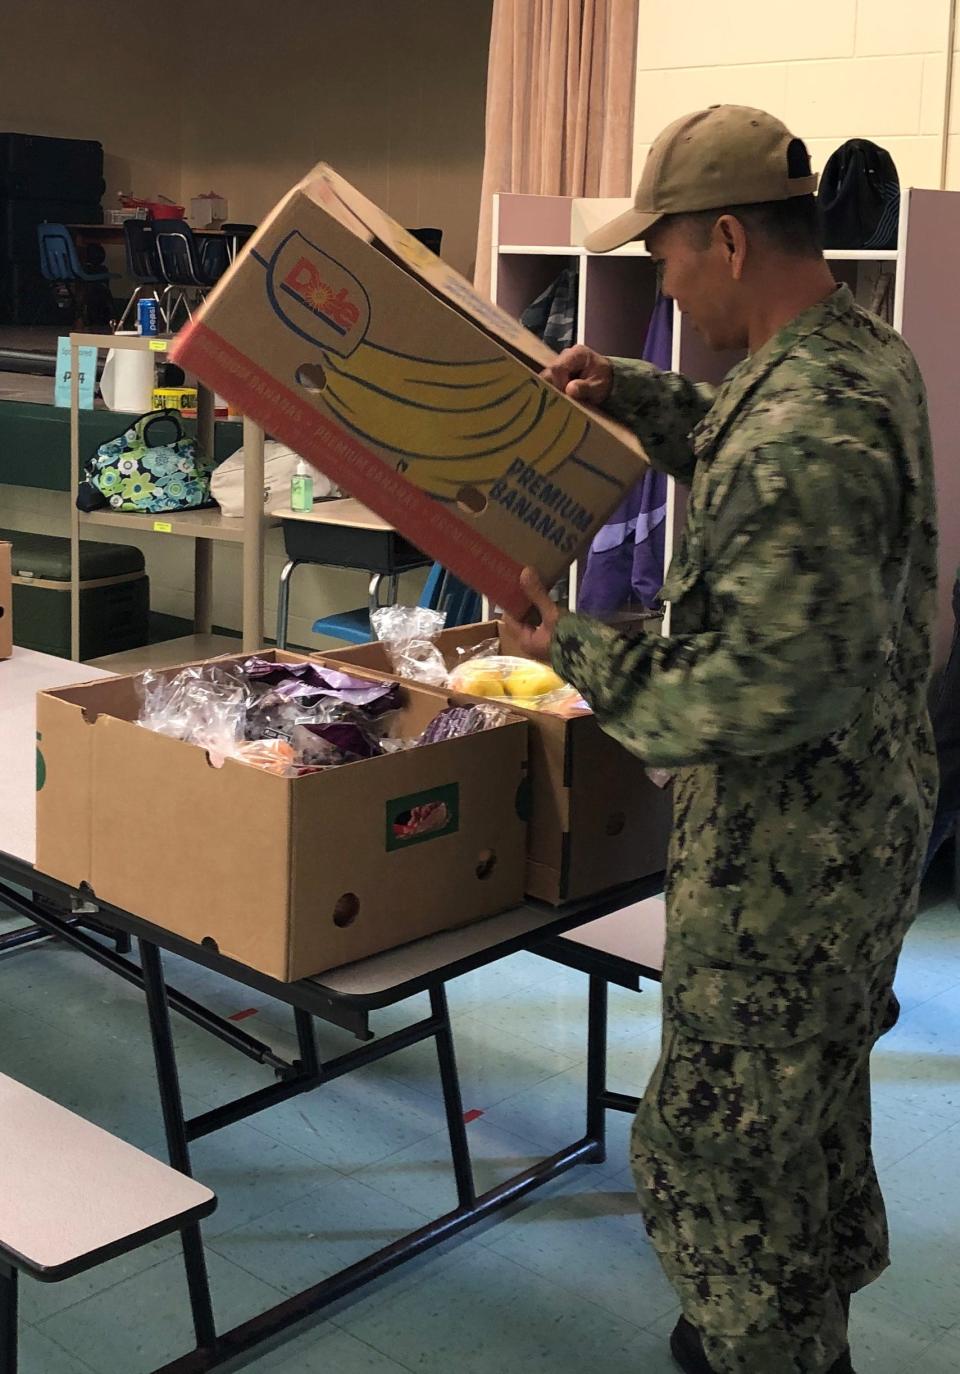 A volunteer unloads fresh groceries for the BEAM food pantry. The agency recently partnered with the Mayport USO to help fight food insecurity among military families.